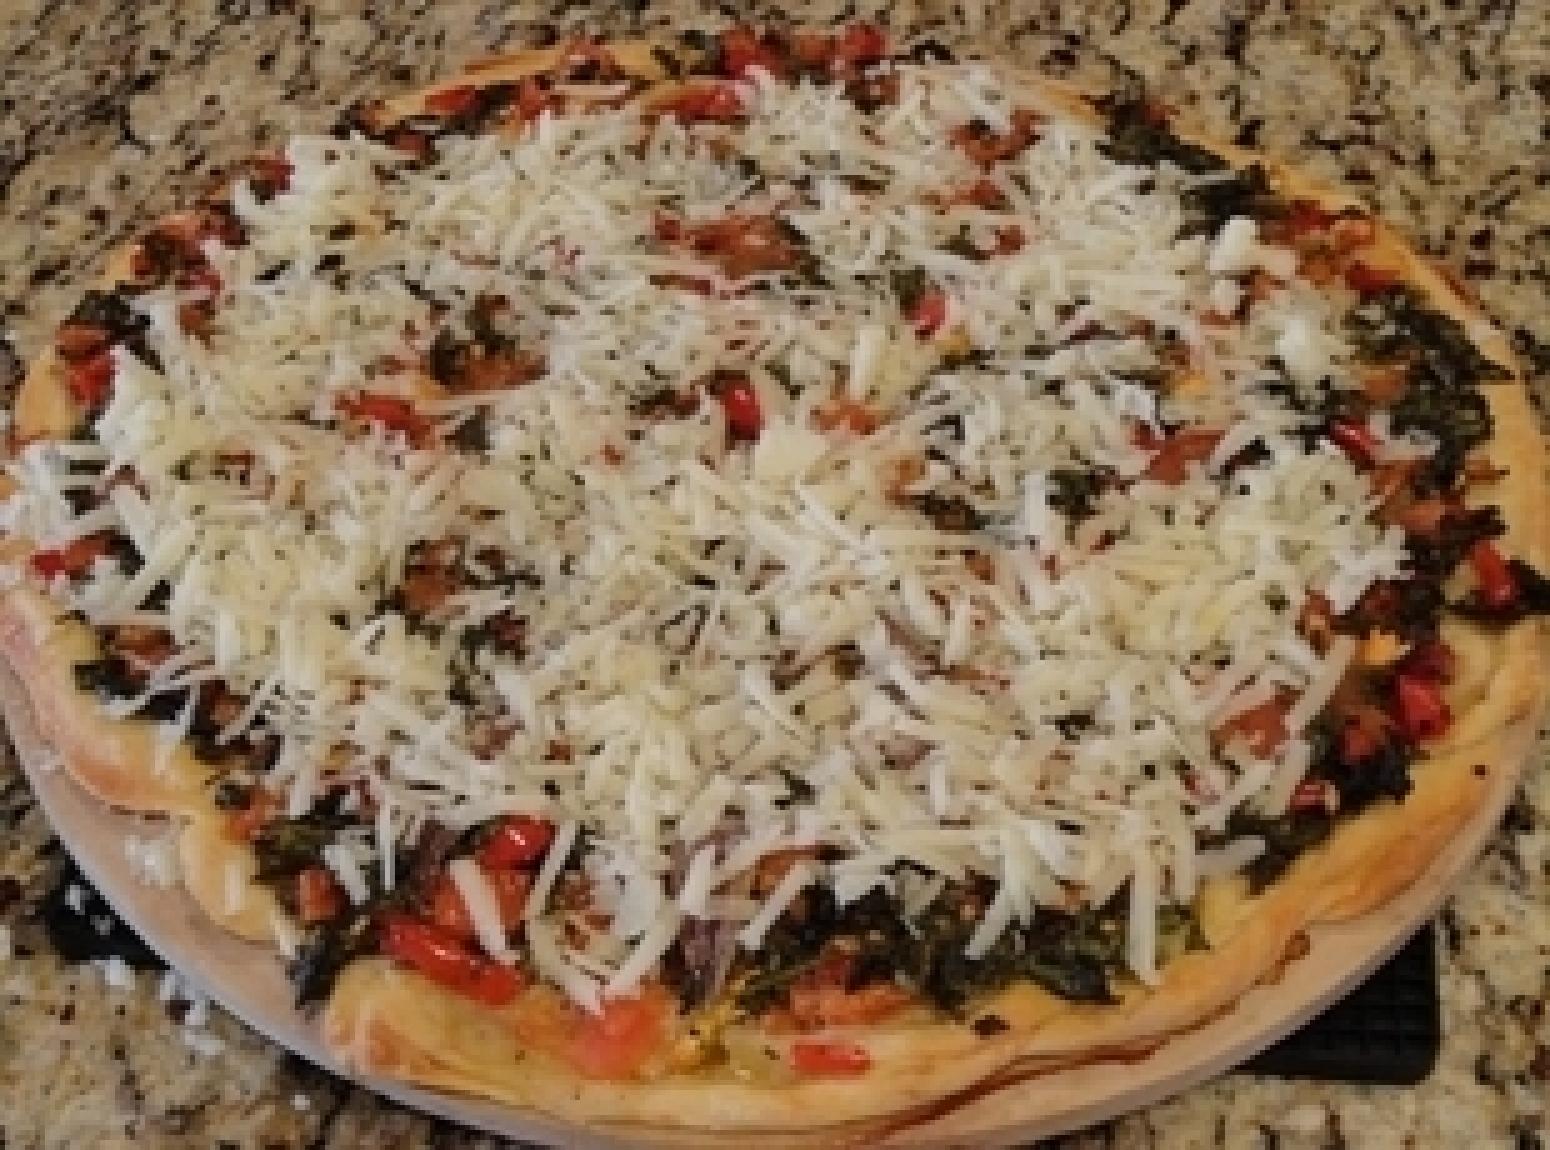 Spicy Spinach Pizza